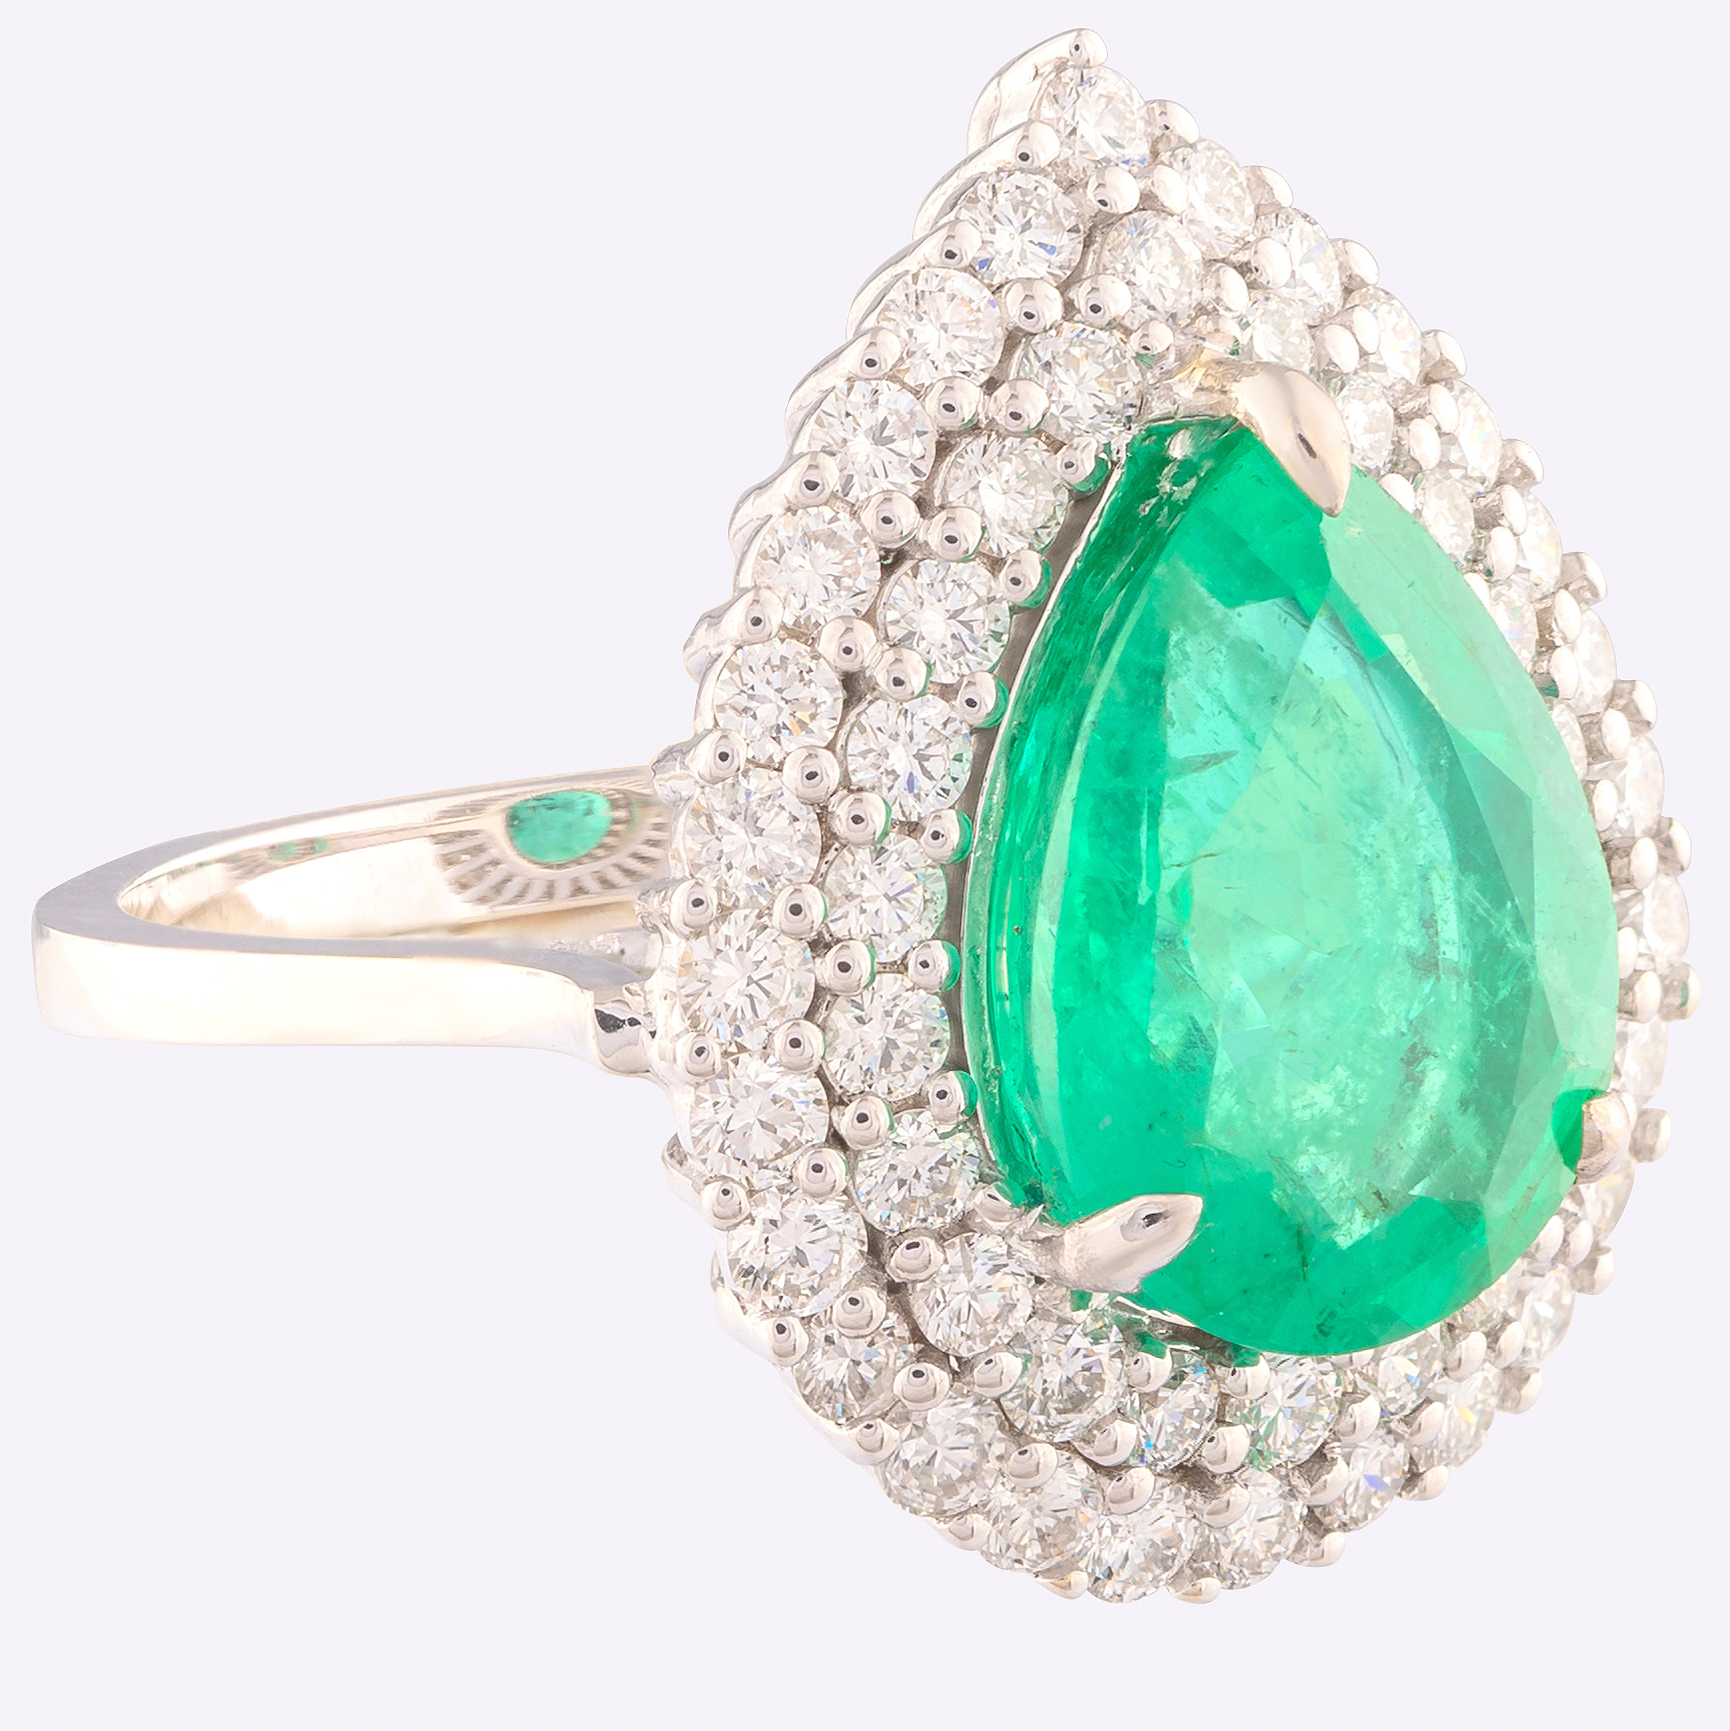 14K White Gold Cluster Ring 4,70 Ct. Natural Emerald - 1,40 Ct. Diamond - Image 3 of 4